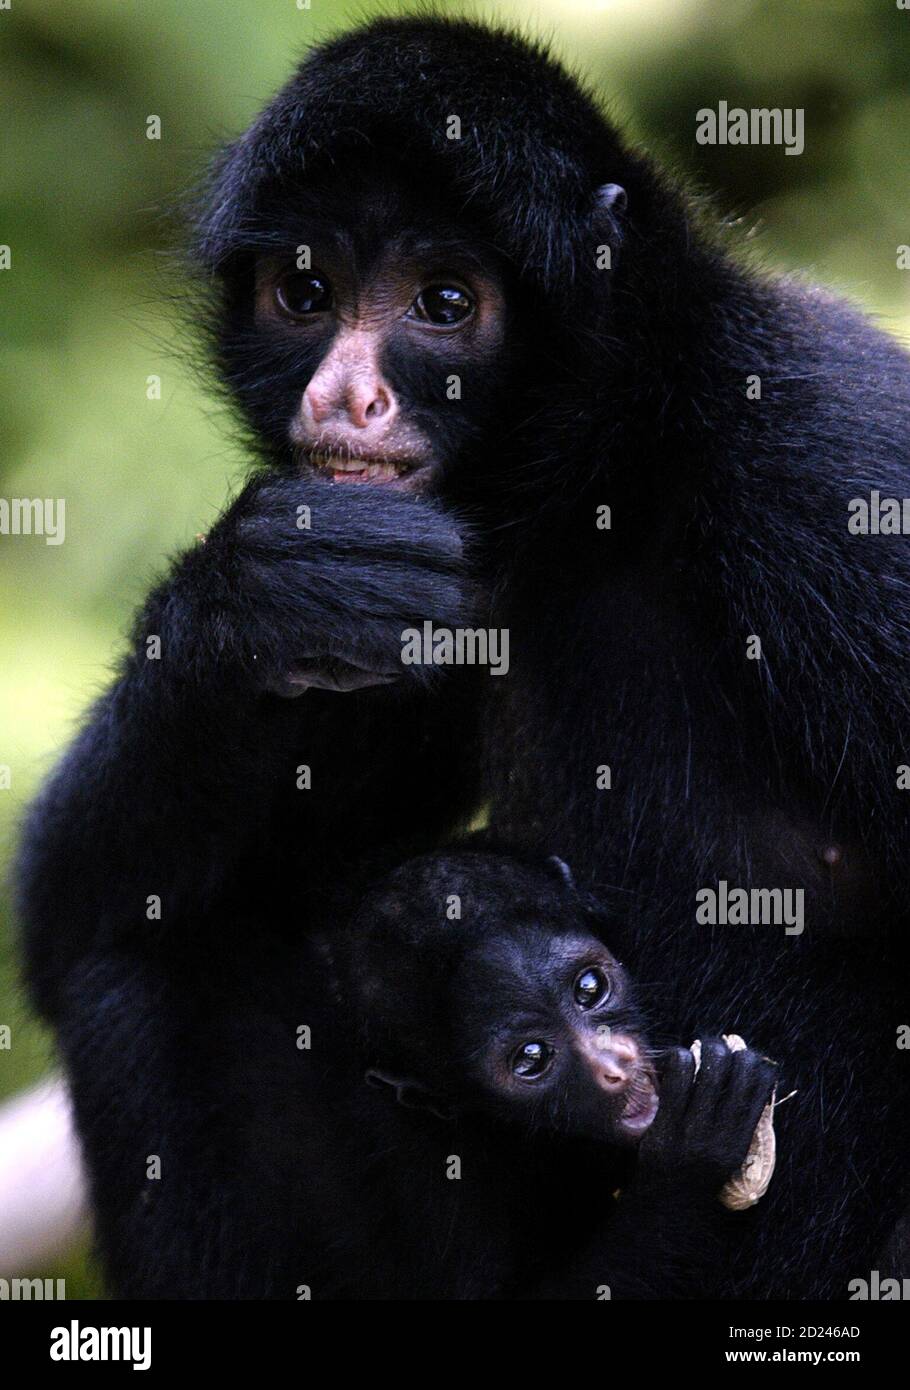 A spider monkey named Mikaela and her baby rest in Bolivia's Machia Park in Villa Tunari in the Bolivian Amazon jungle, 520 km (323 miles) southeast of La Paz, August 17, 2005. The 38-hectare park, created in 1992, is now home to nearly 1,000 animal inhabitants, all rescued from captivity. It has become a popular destination for many foreigners traveling through Bolivia, with dozens of Europeans, Israelis and Bolivians working together for several weeks in close contact with the animals. These volunteers consider the experience therapeutic for both the animals and themselves, and aim to readap Stock Photo